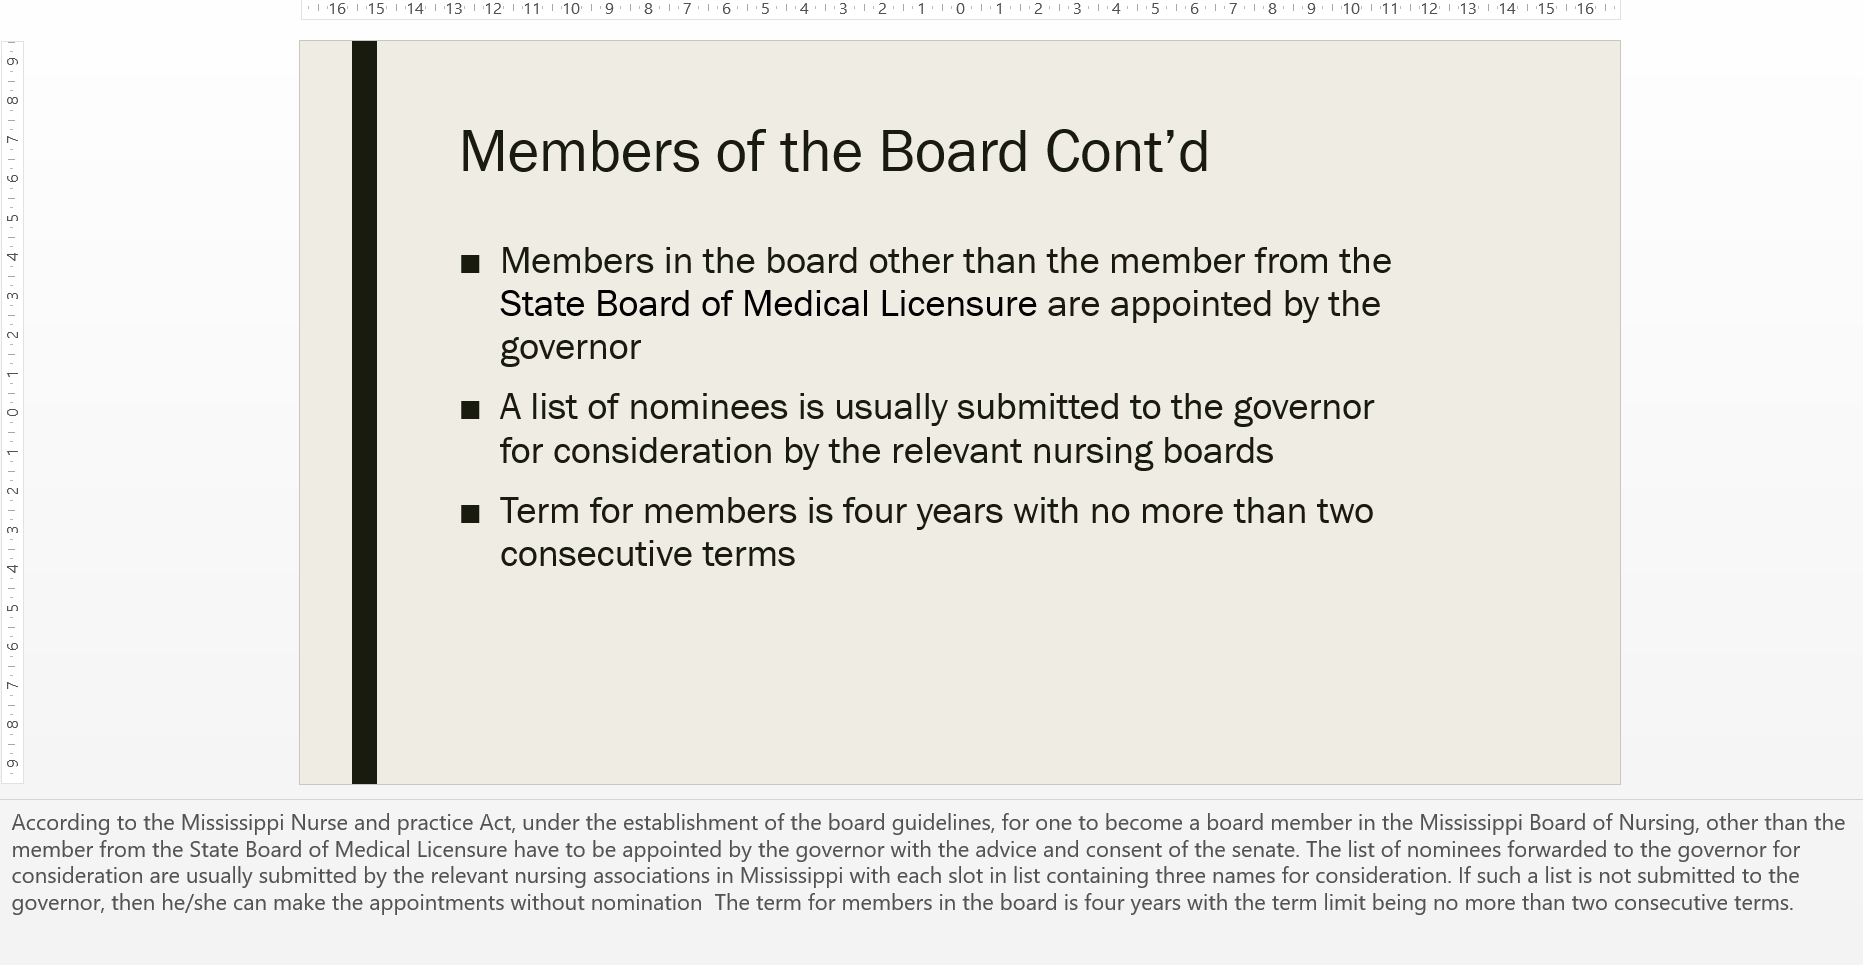 Describe the differences between a board of nursing